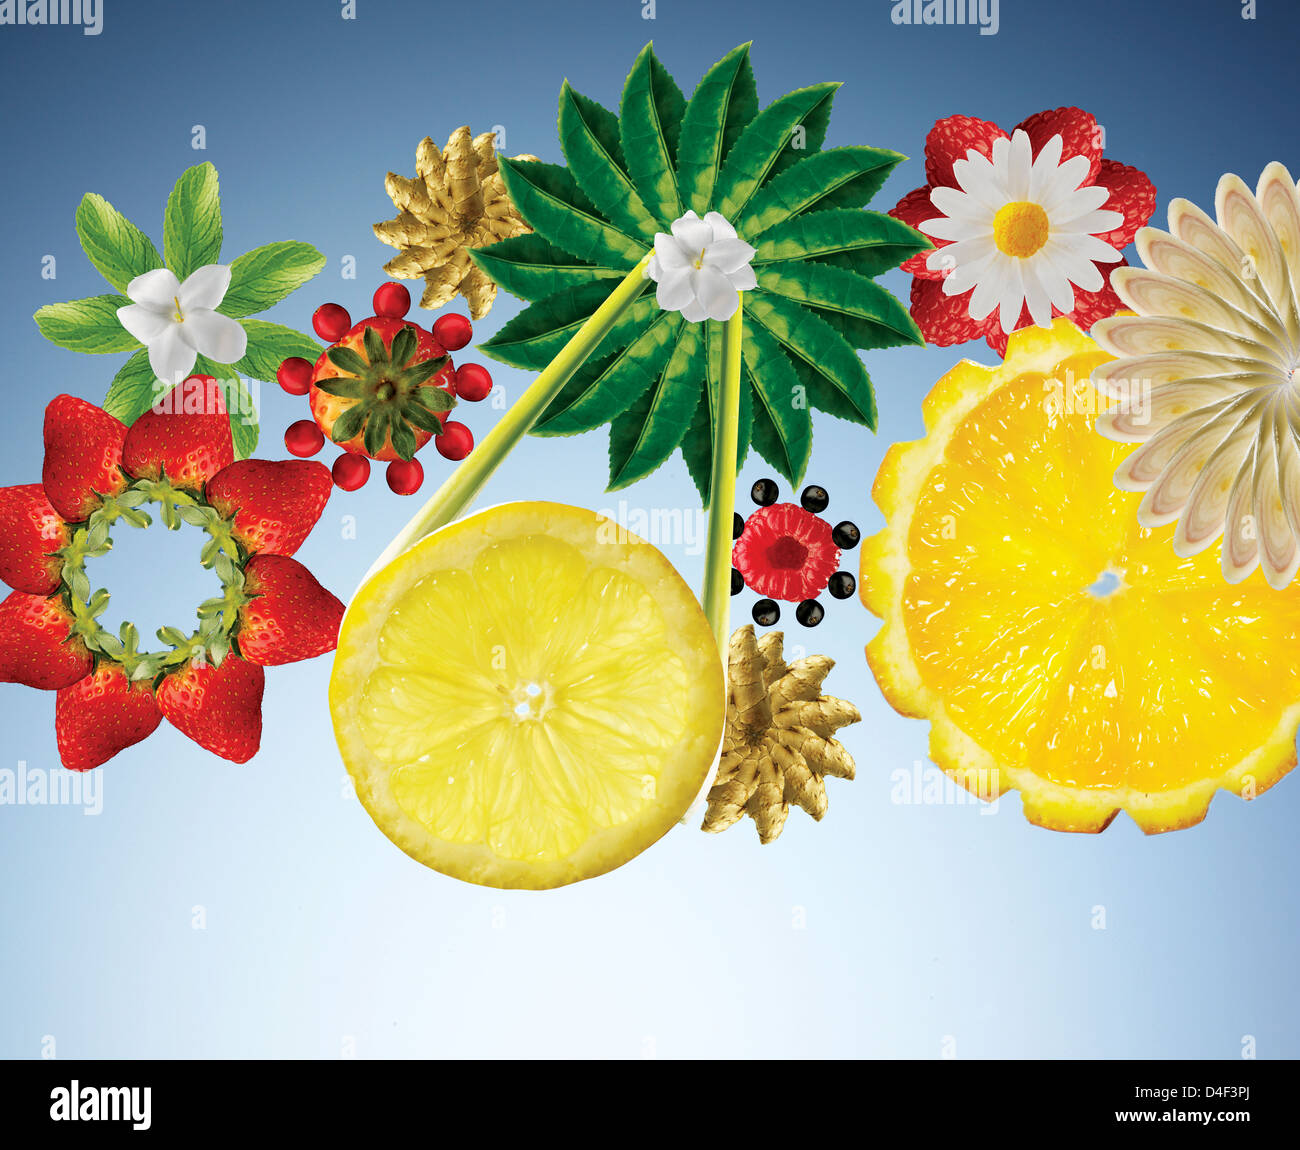 Illustration of fruits and vegetables in flower shapes Stock Photo